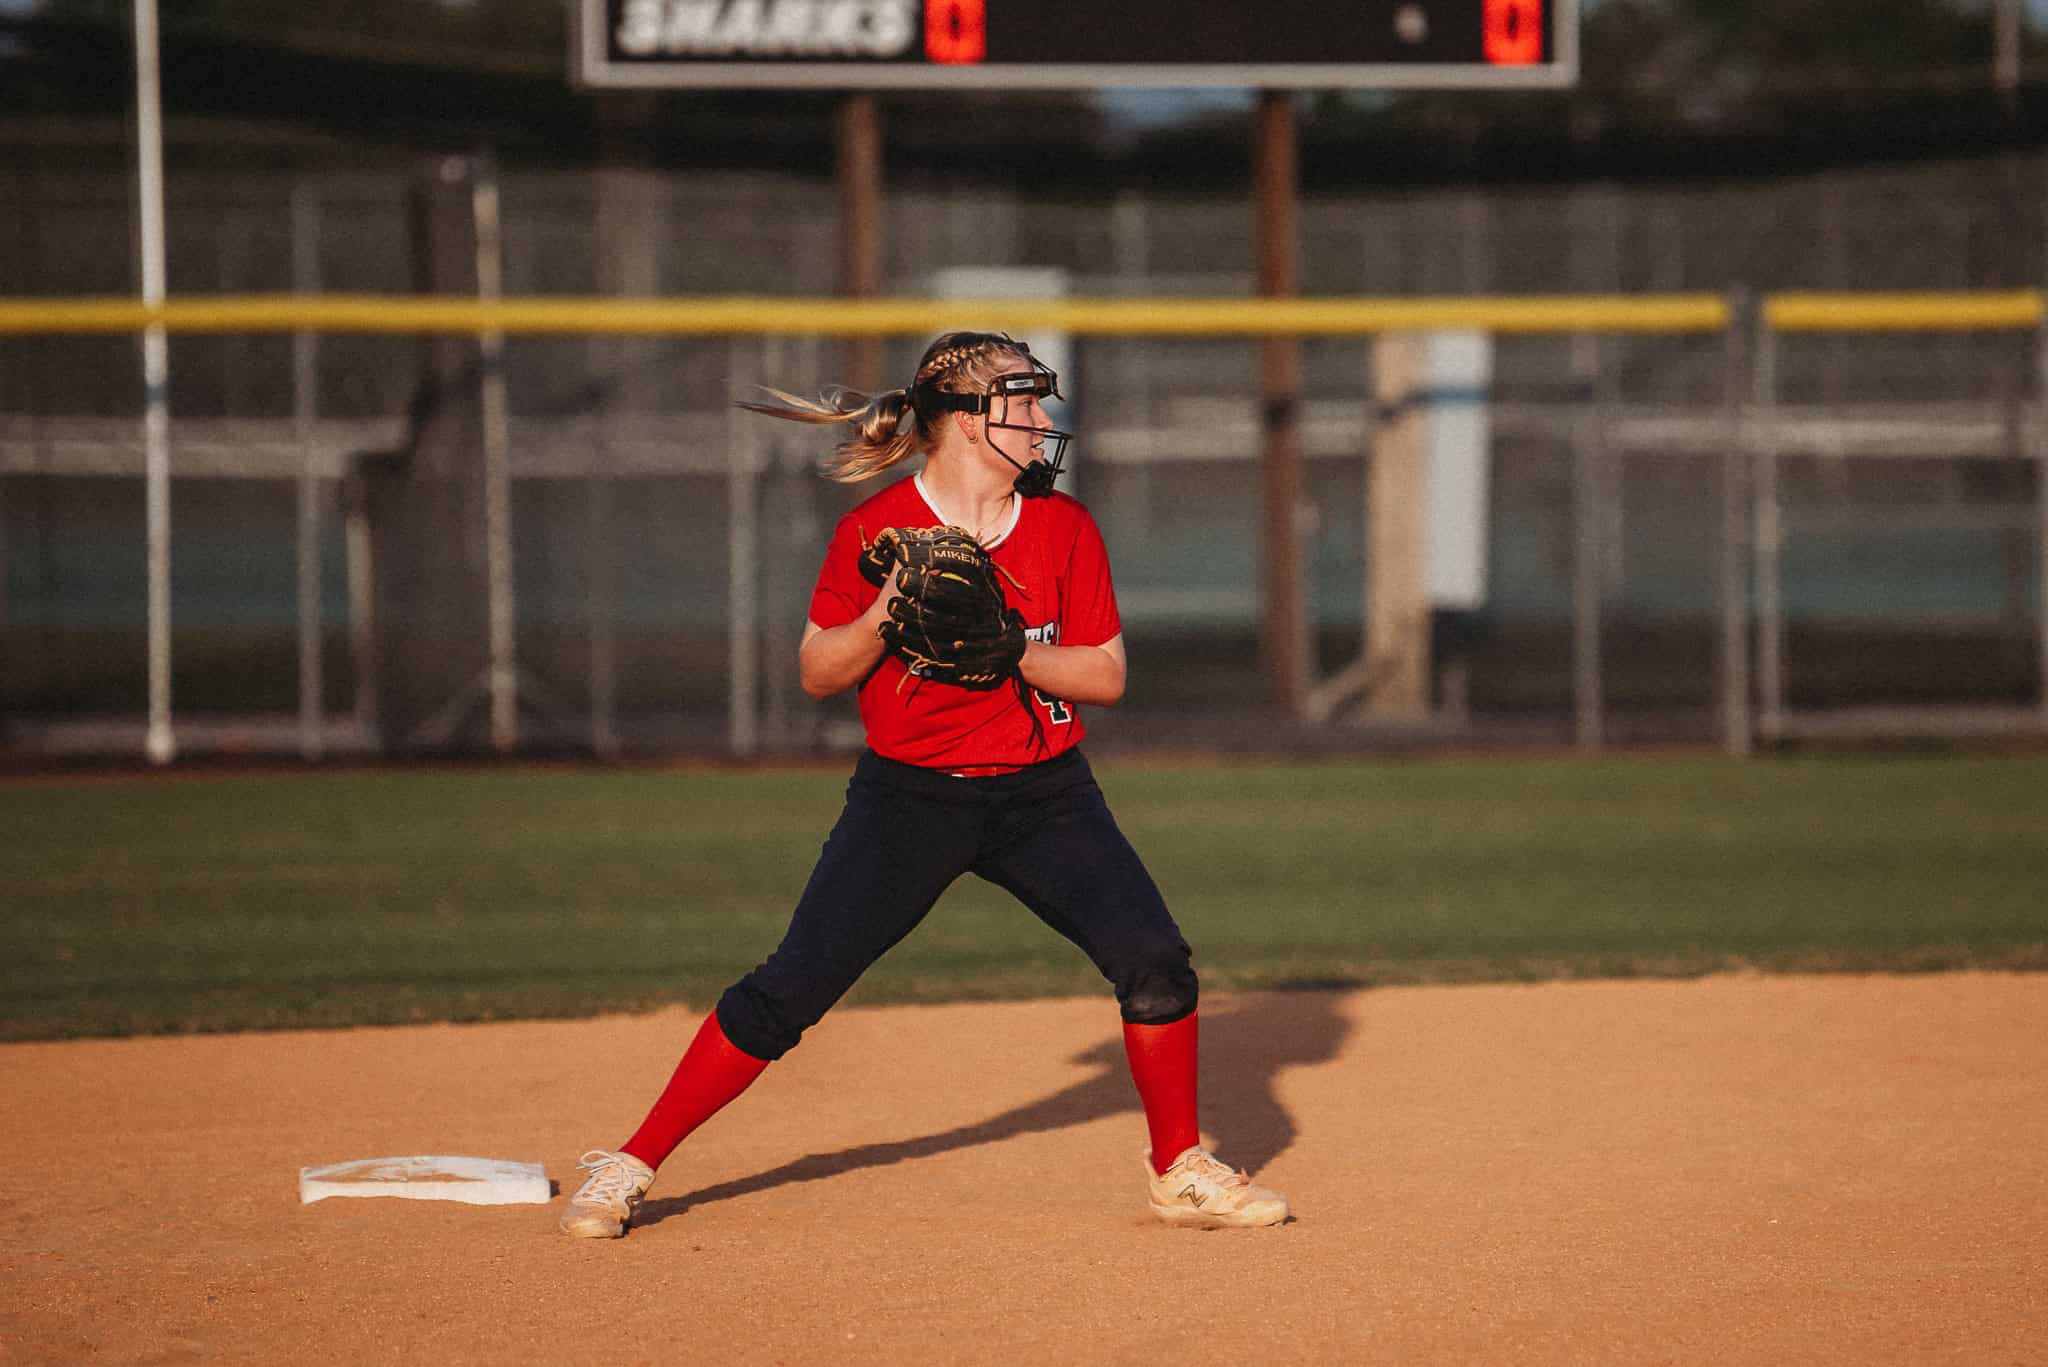 Springstead's Liberty Savarese (SR) covers second base. [Photo by Cynthia Leota]